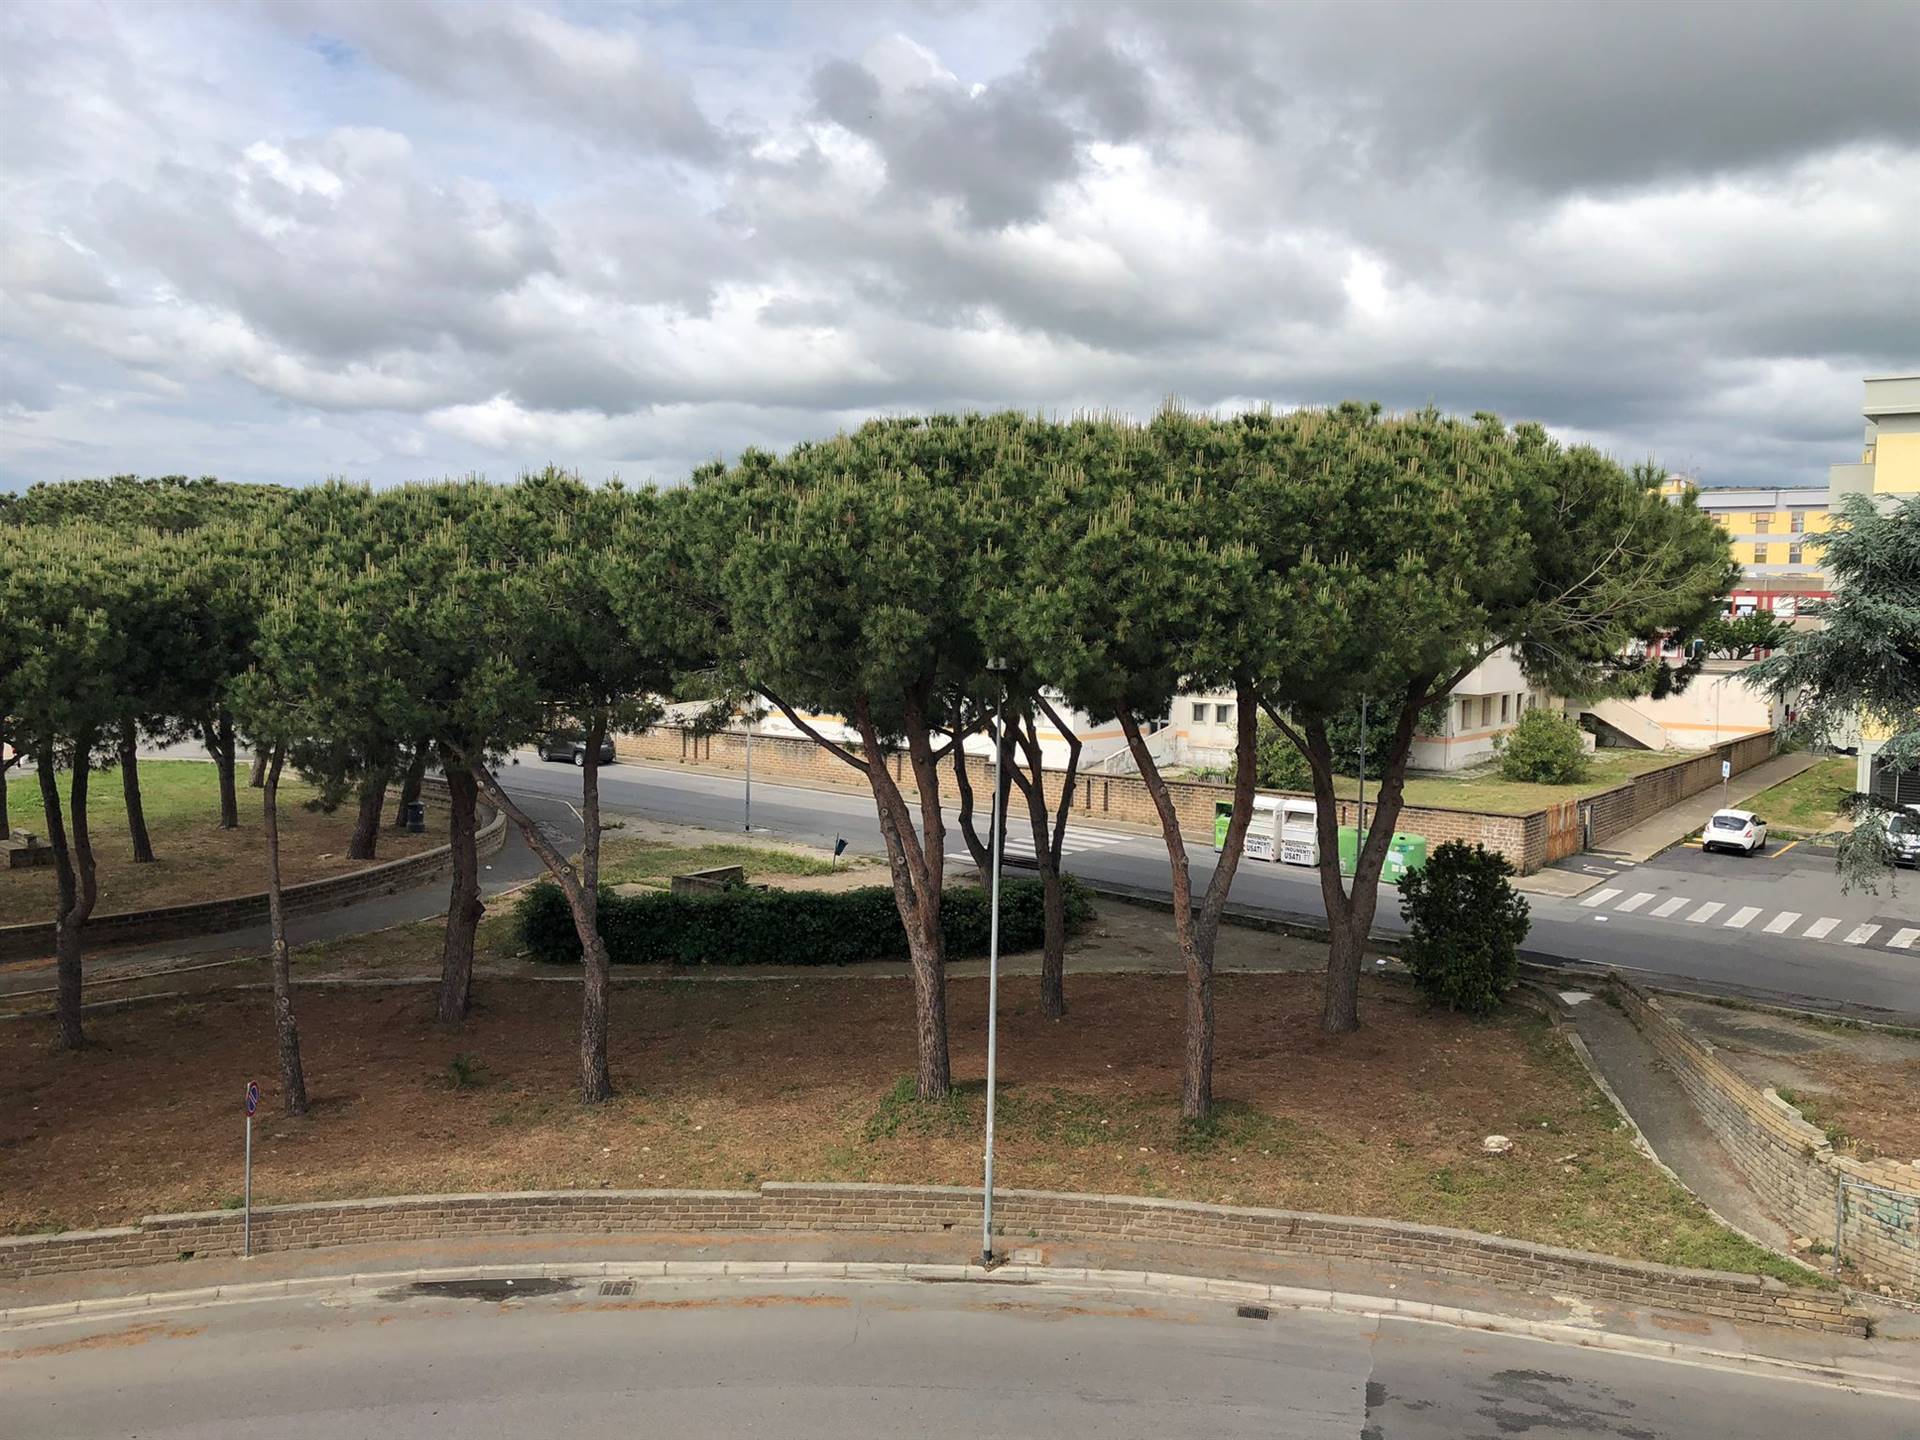 CAMPO DELL'ORO, CIVITAVECCHIA, Apartment for sale of 90 Sq. mt., Habitable, Heating Individual heating system, Energetic class: G, placed at 3° on 5, composed by: 5 Rooms, Separate kitchen, , 2 